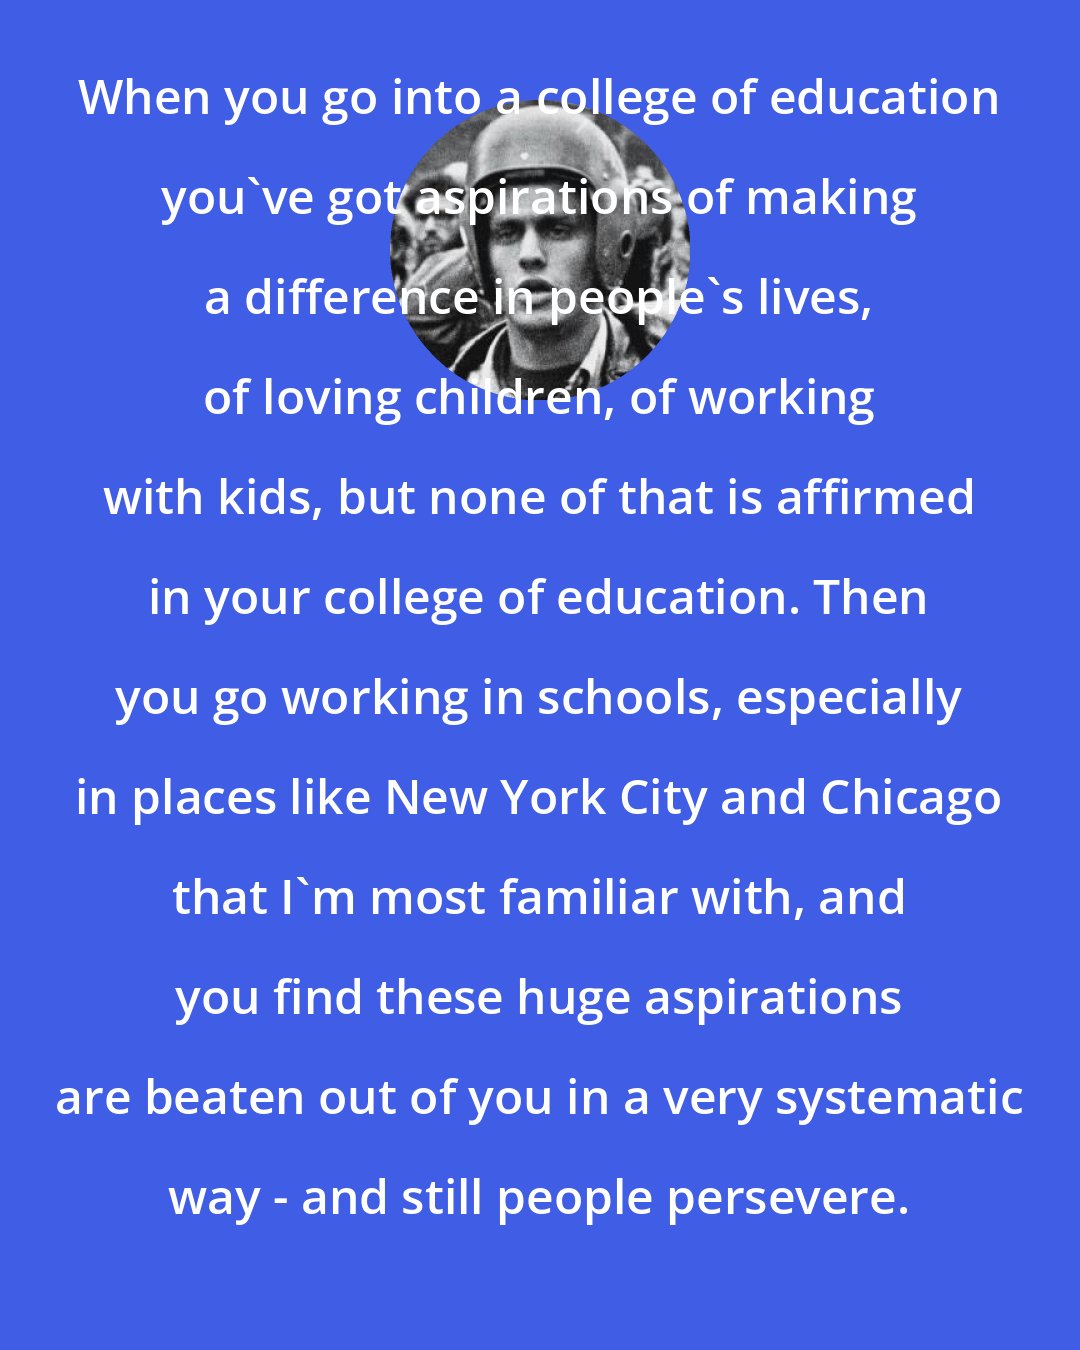 Bill Ayers: When you go into a college of education you've got aspirations of making a difference in people's lives, of loving children, of working with kids, but none of that is affirmed in your college of education. Then you go working in schools, especially in places like New York City and Chicago that I'm most familiar with, and you find these huge aspirations are beaten out of you in a very systematic way - and still people persevere.